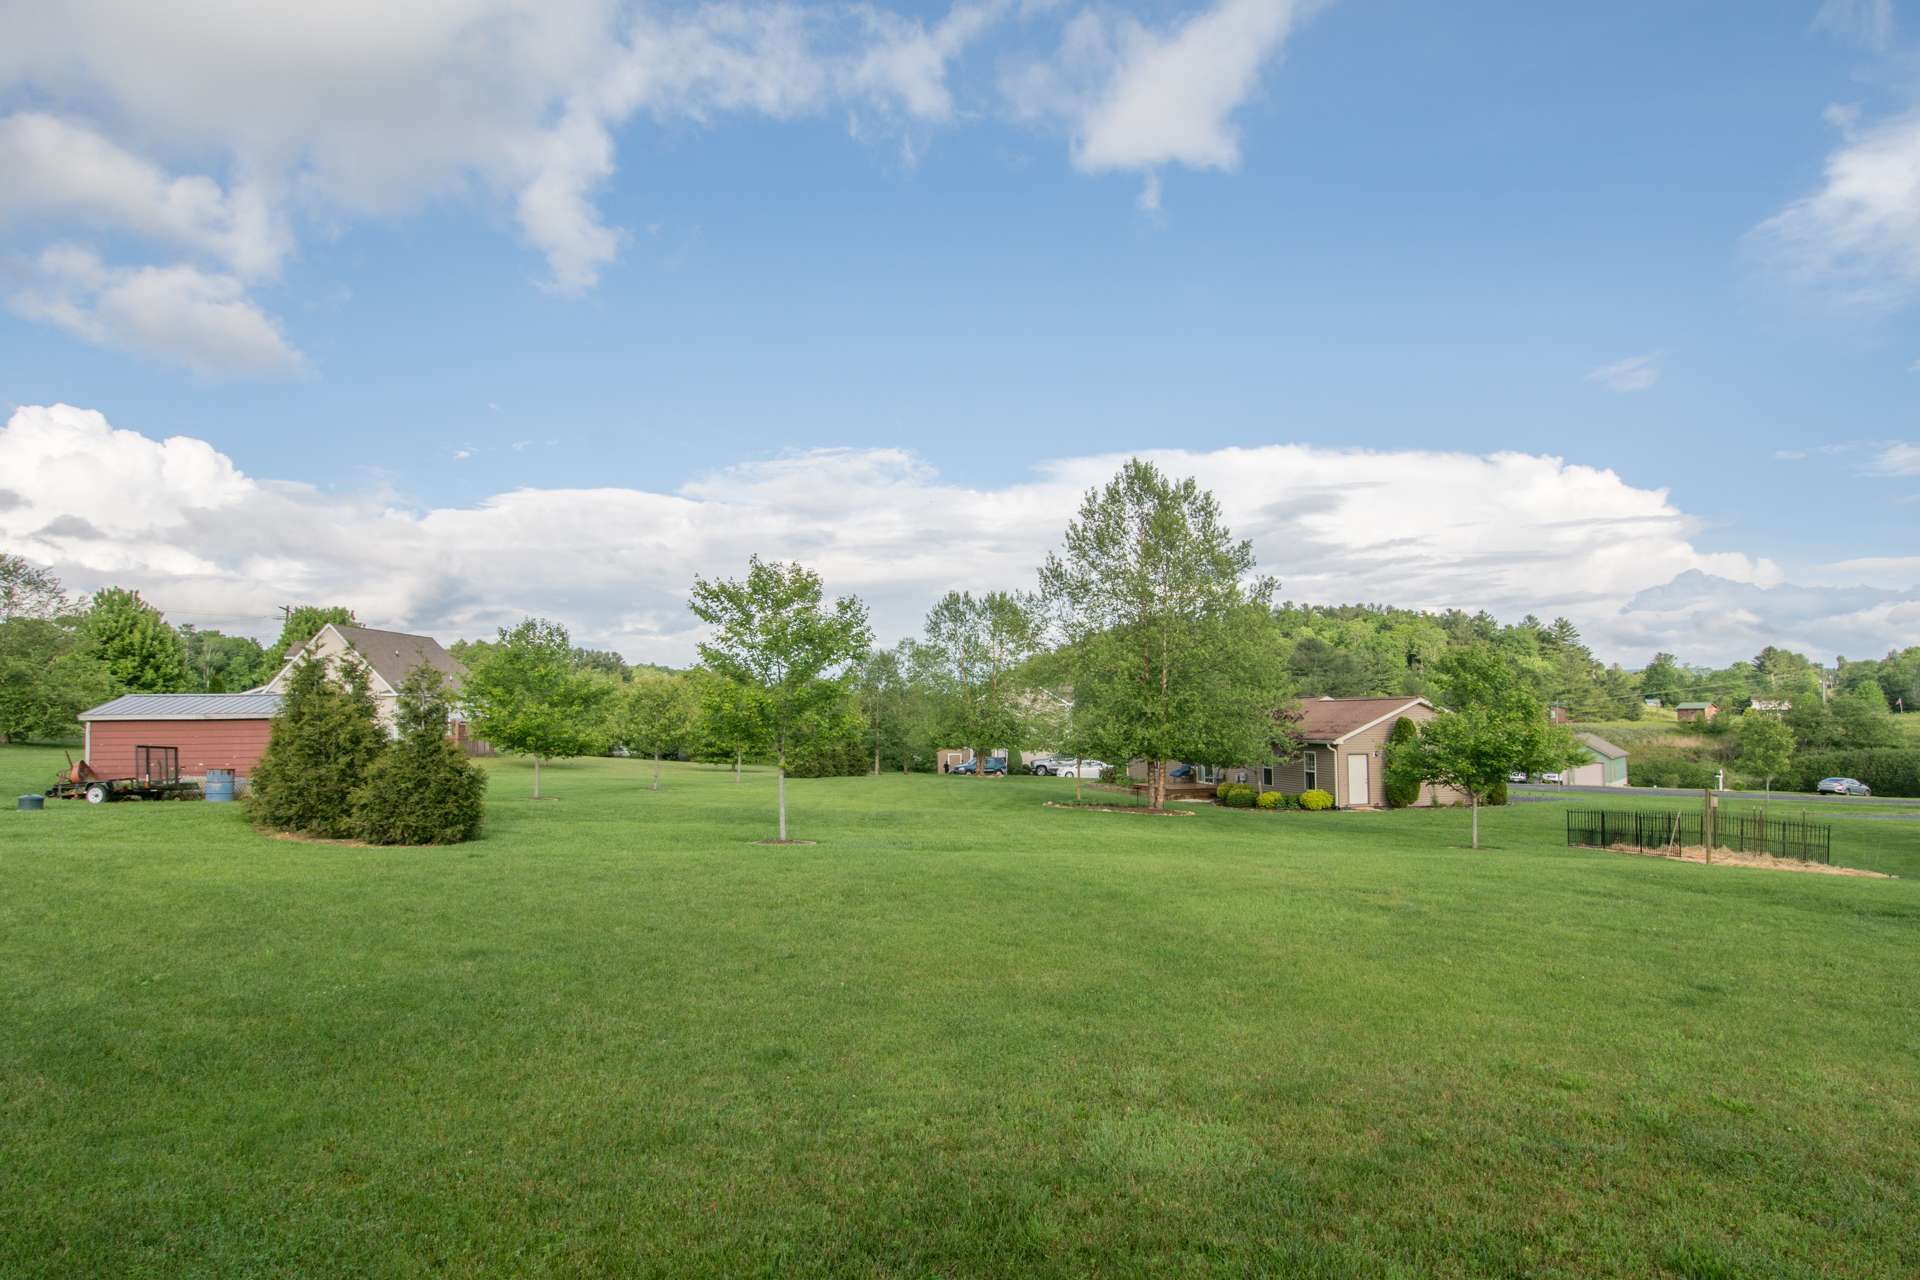 The 0.6 acre setting is a great space for children, pets and/or gardening.